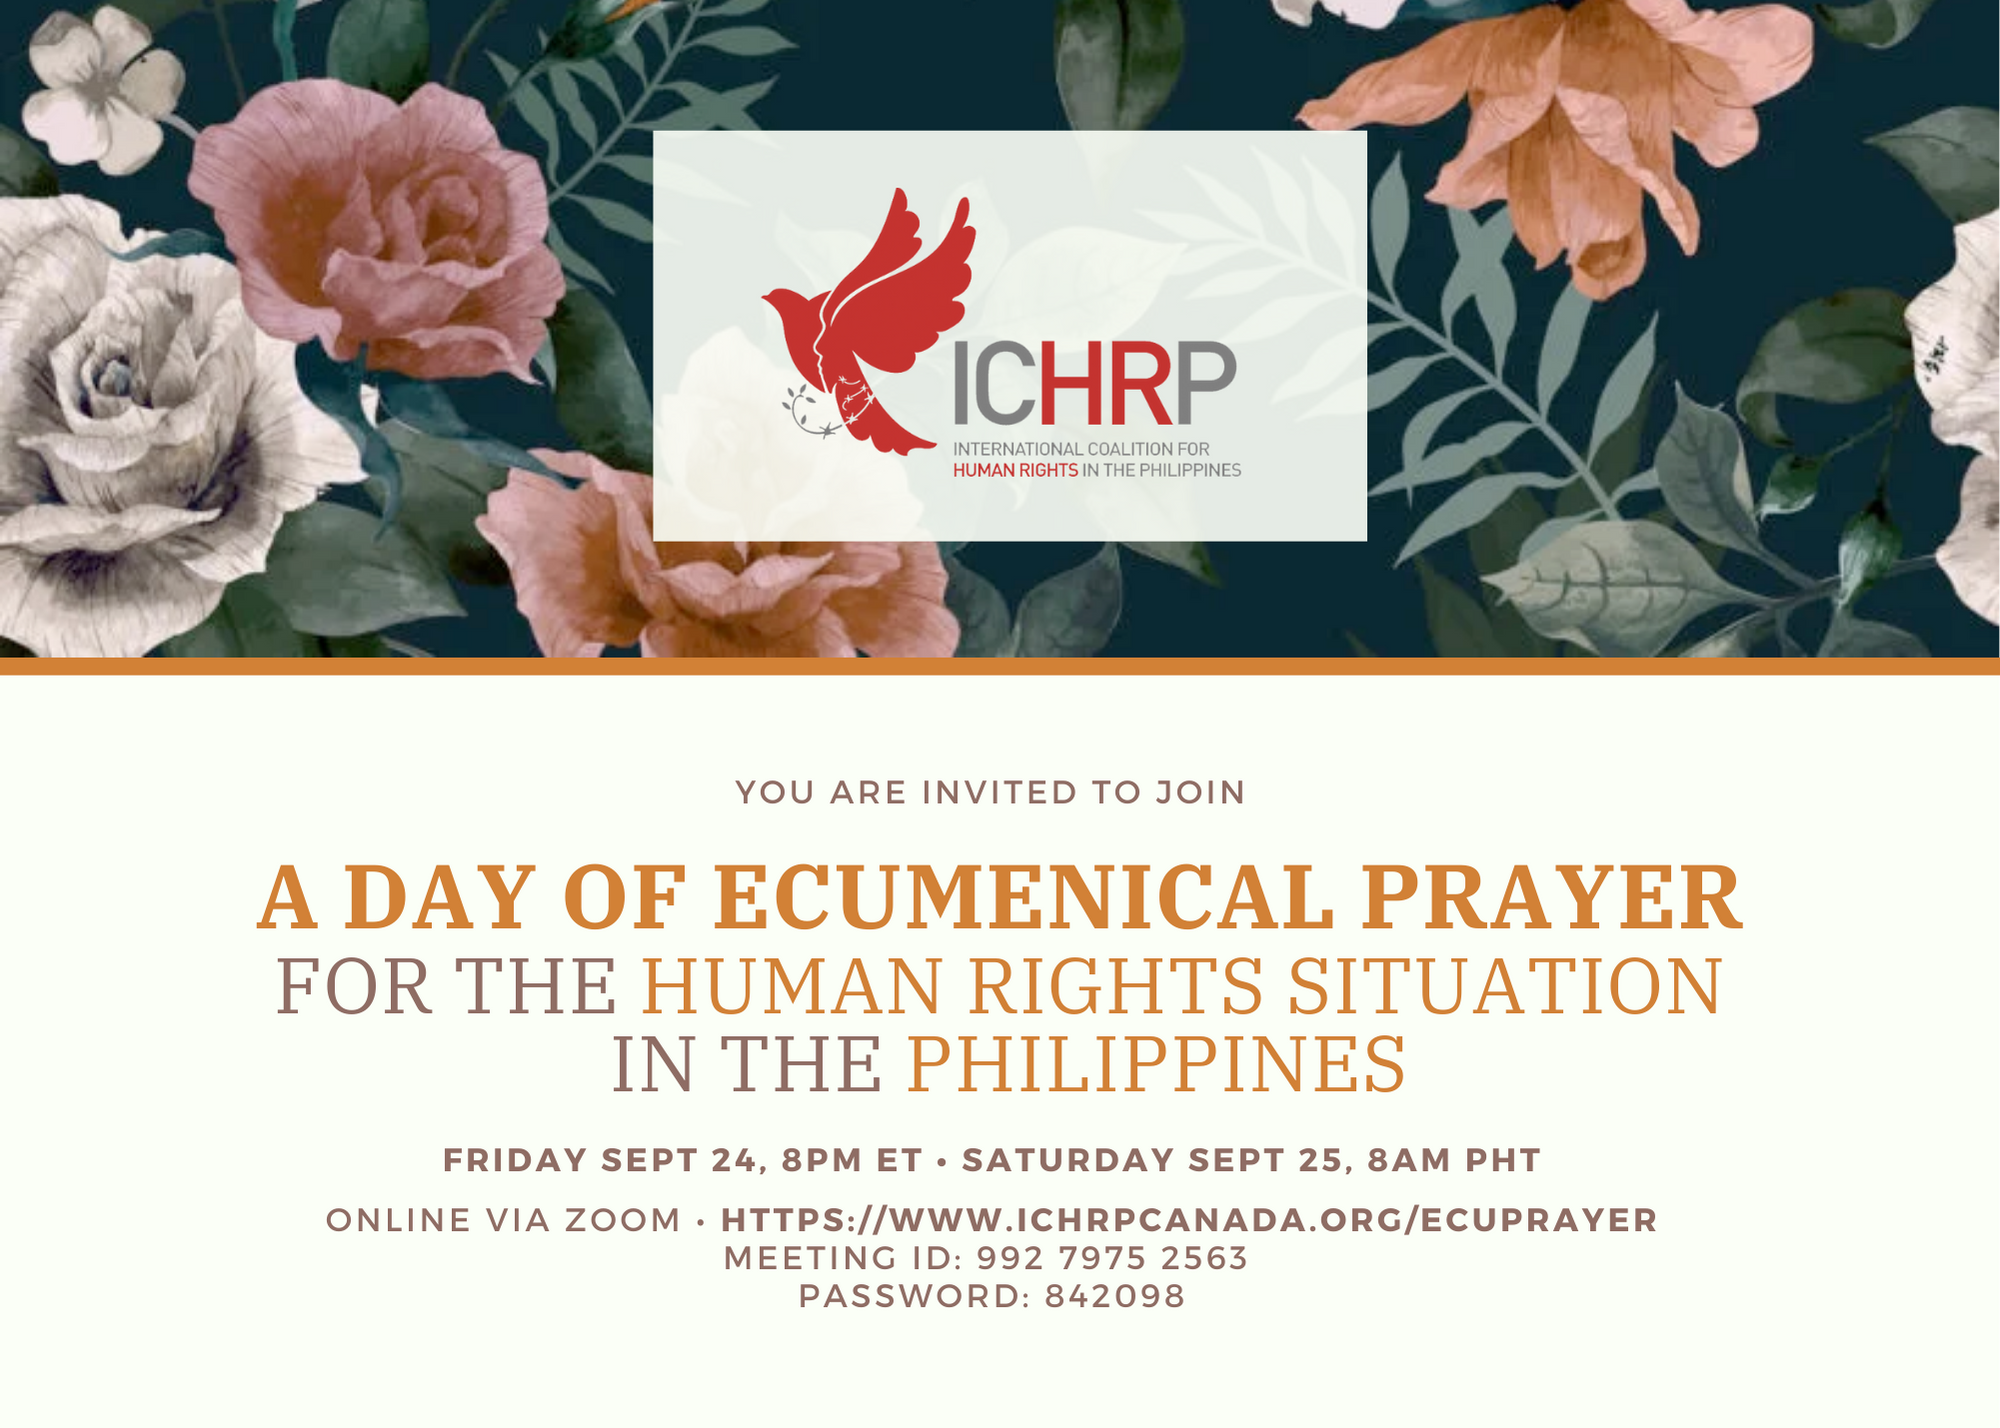 A Day of Ecumenical Prayer for Human Rights in the Philippines